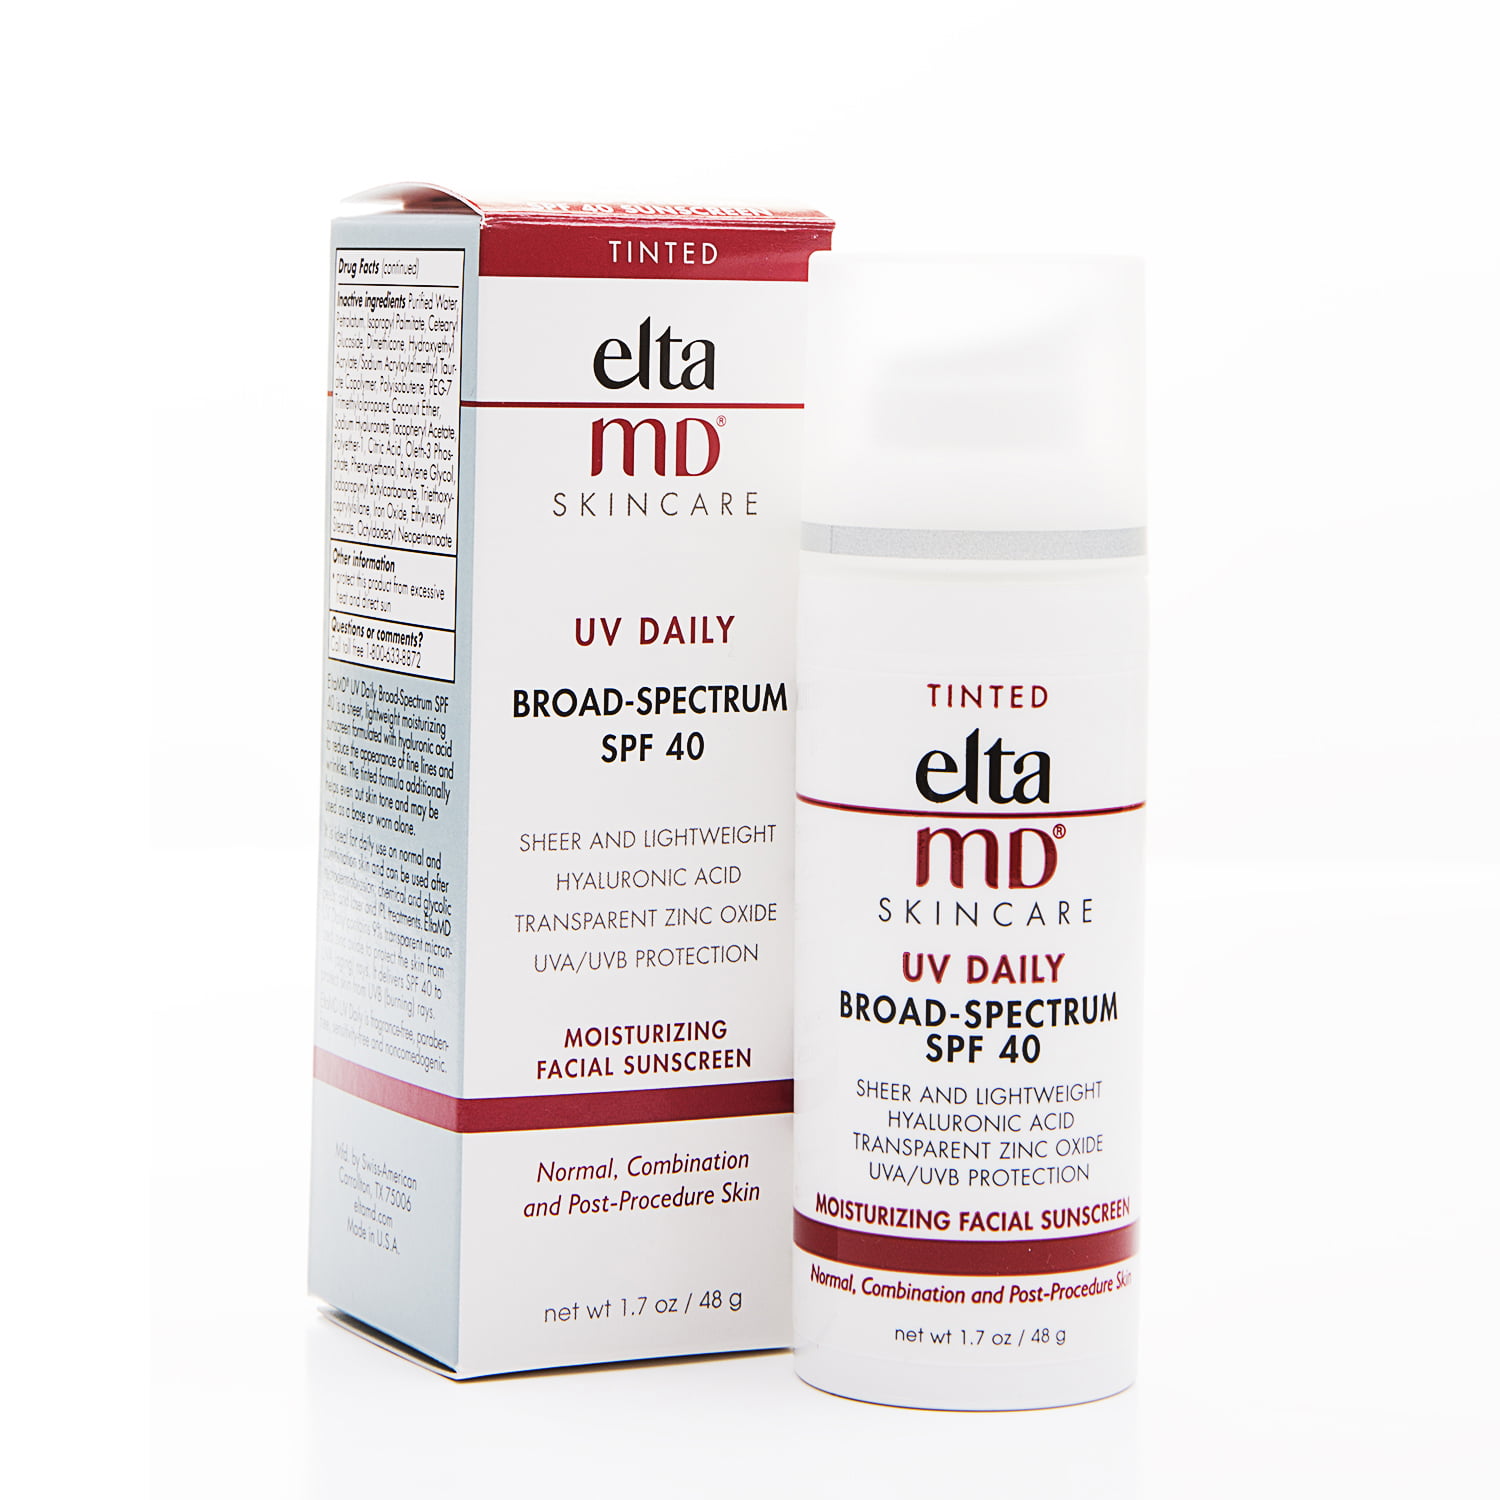 elta md tinted sunscreen dupe